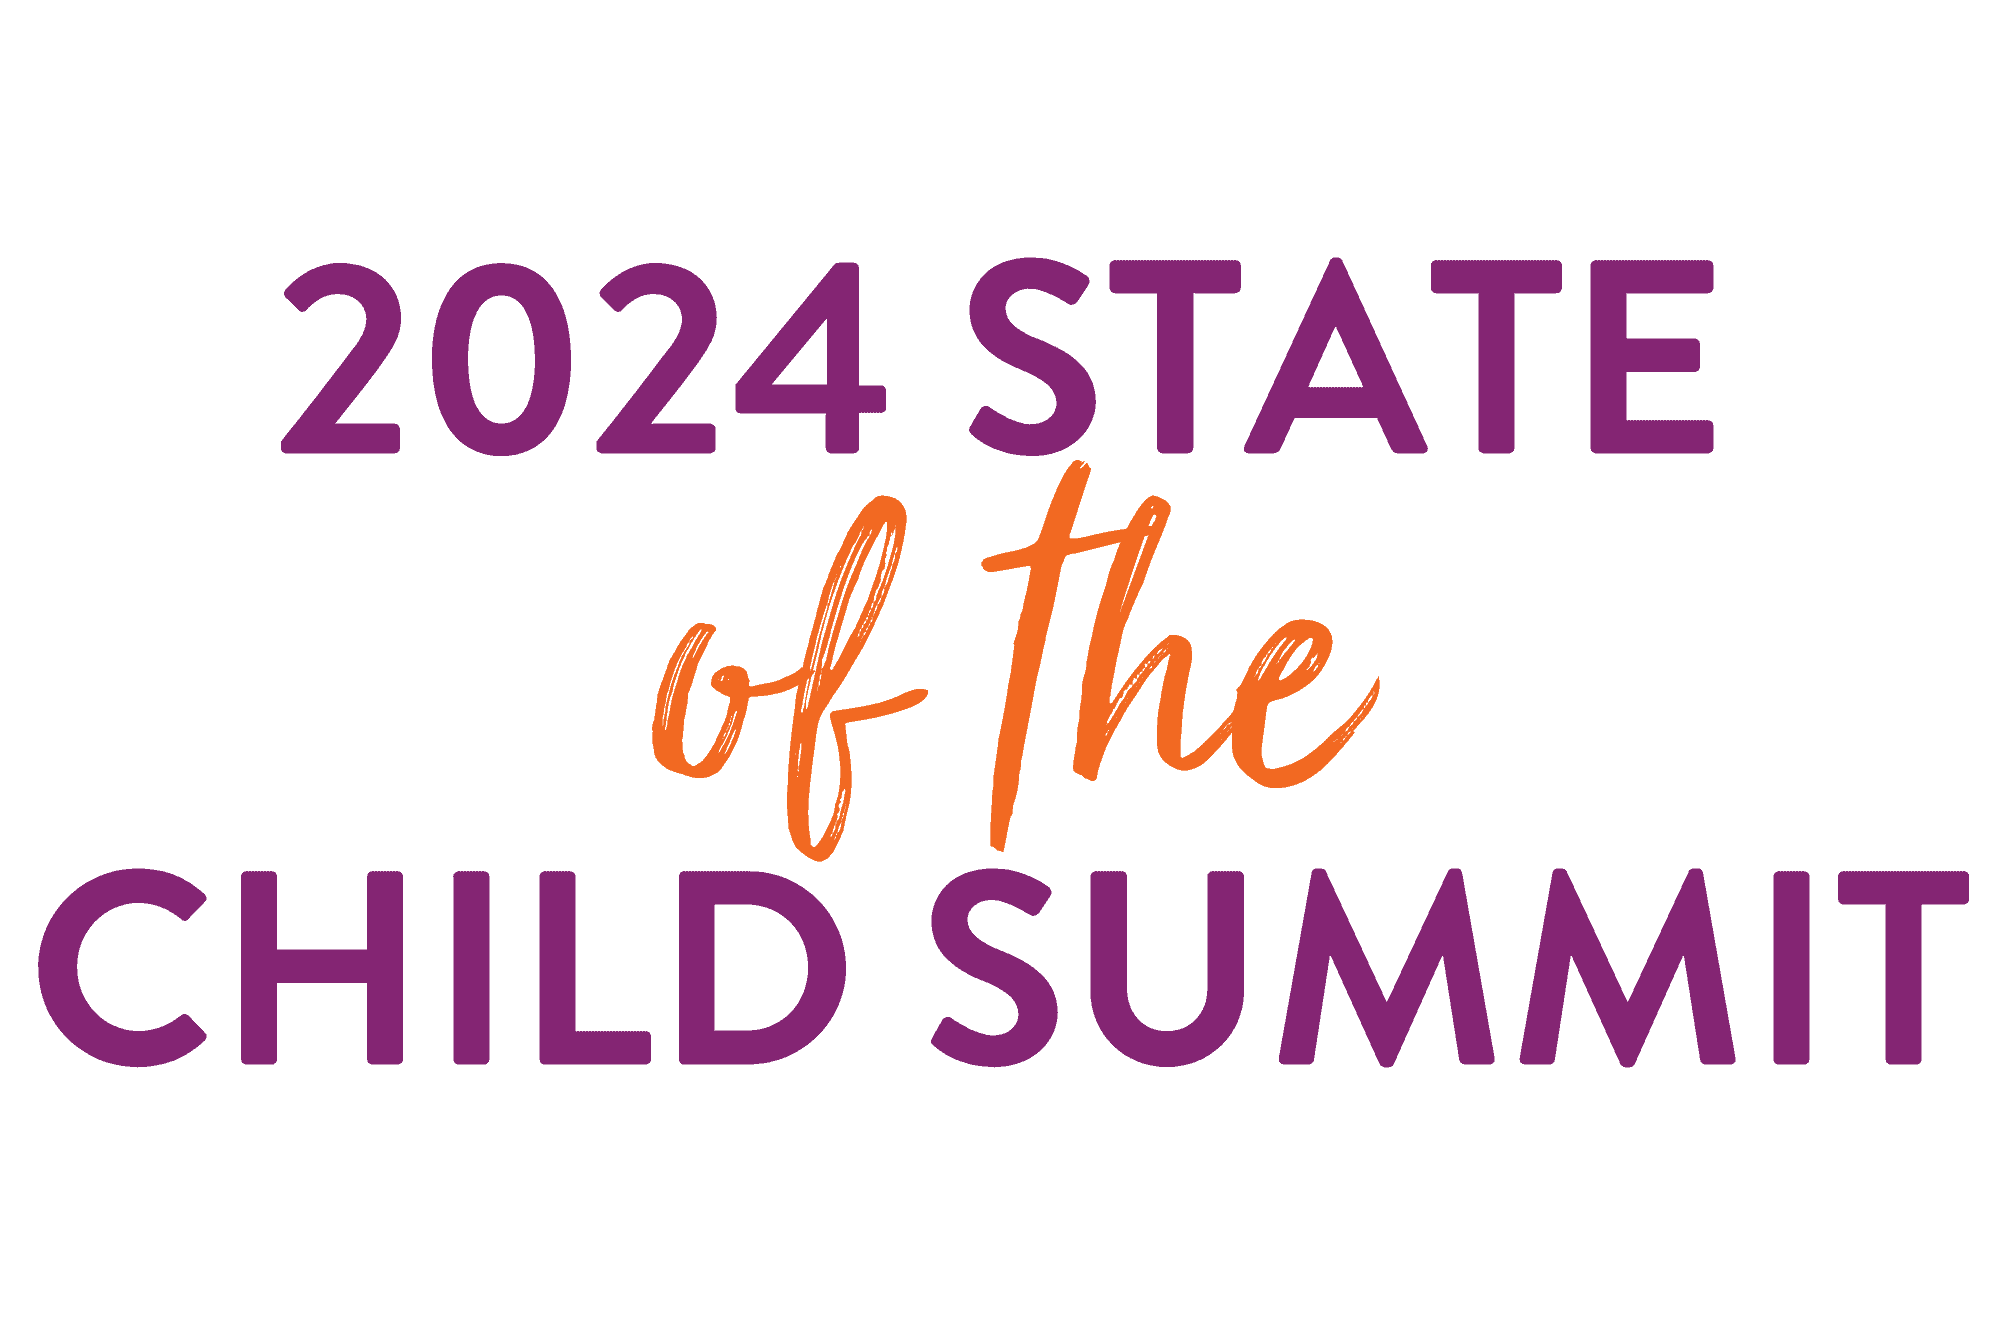 2024 state of the child summit